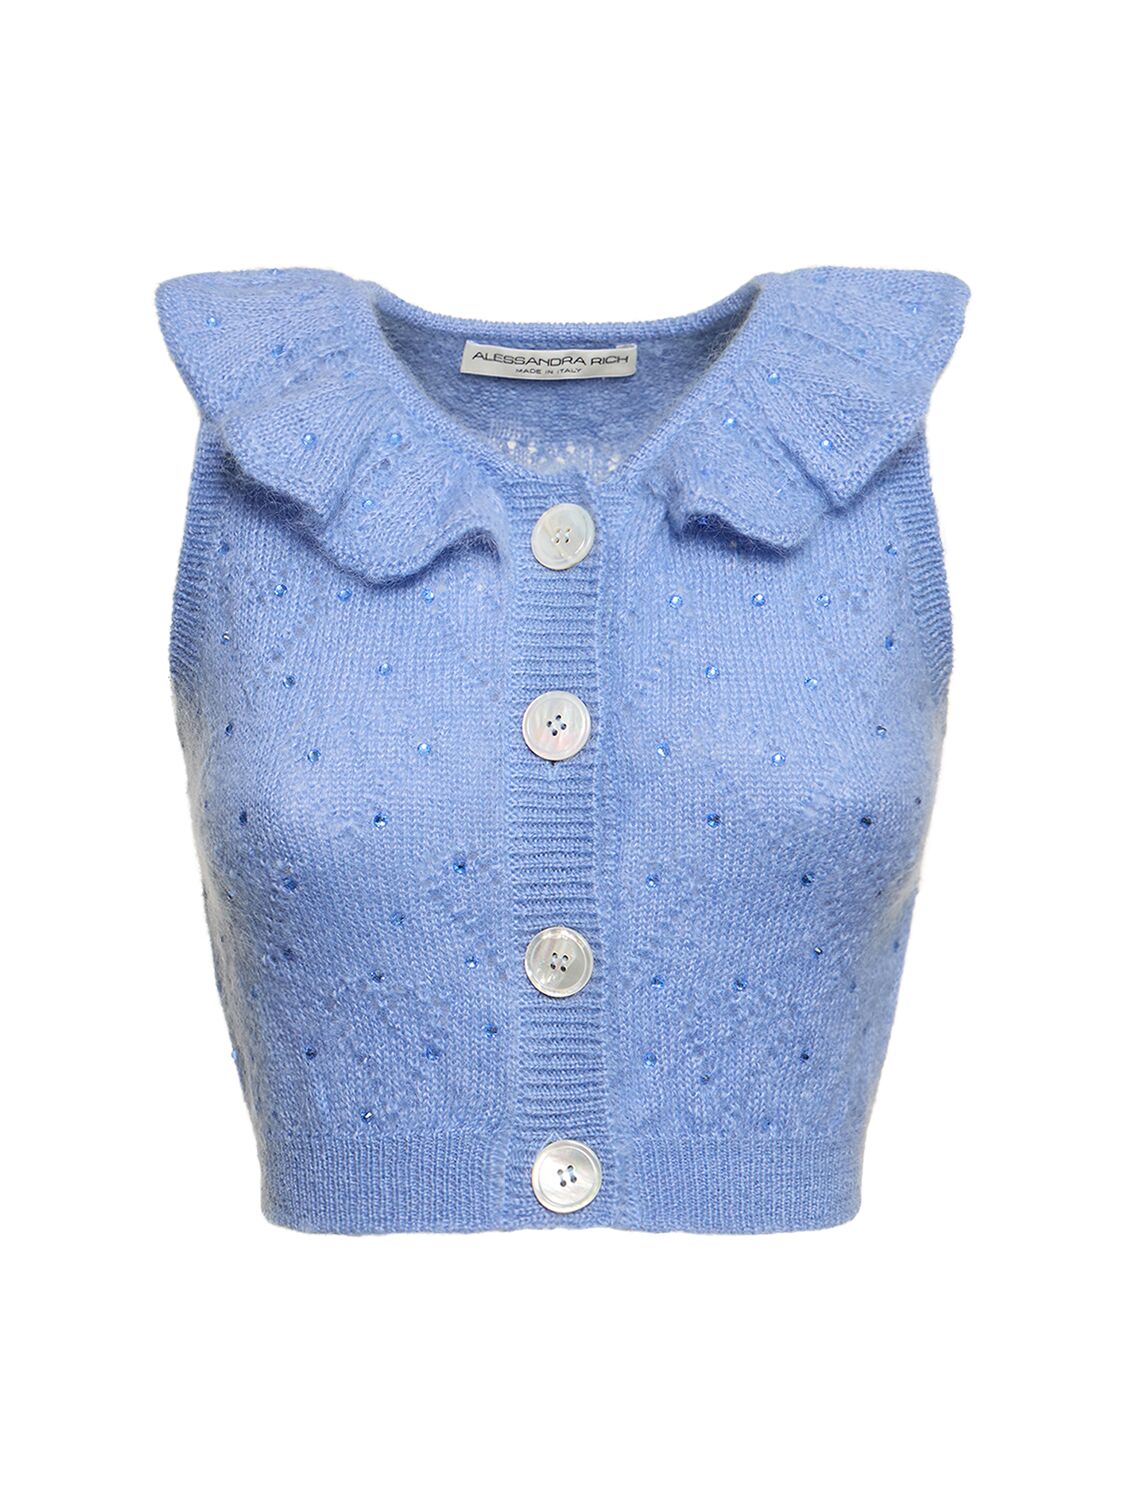 Alessandra Rich Mohair Knit Cropped Vest Top W/ Studs In Light Blue